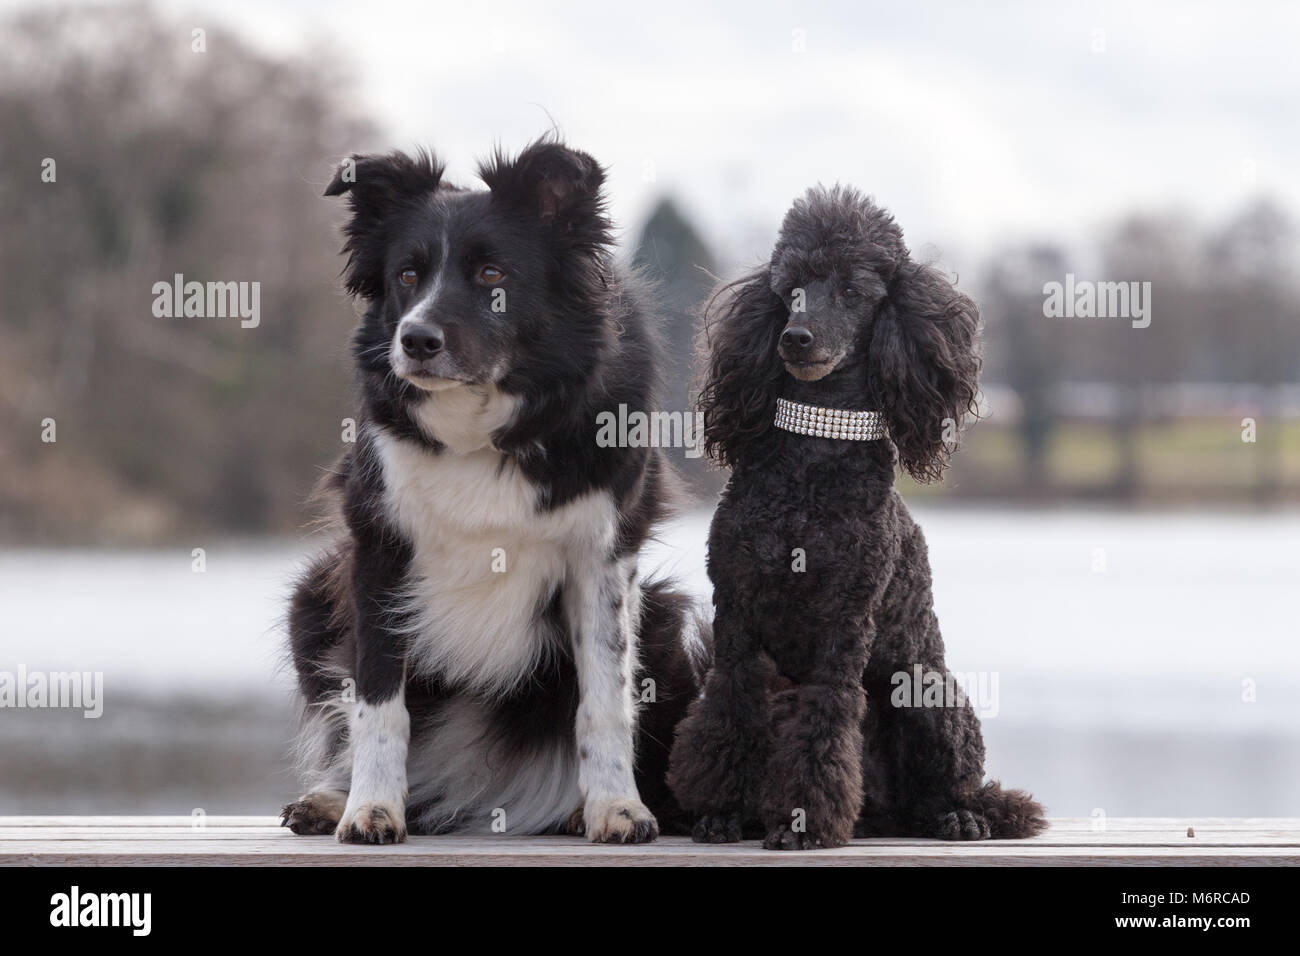 Border Collie and Miniature Poodle dogs, crufts Stock Photo